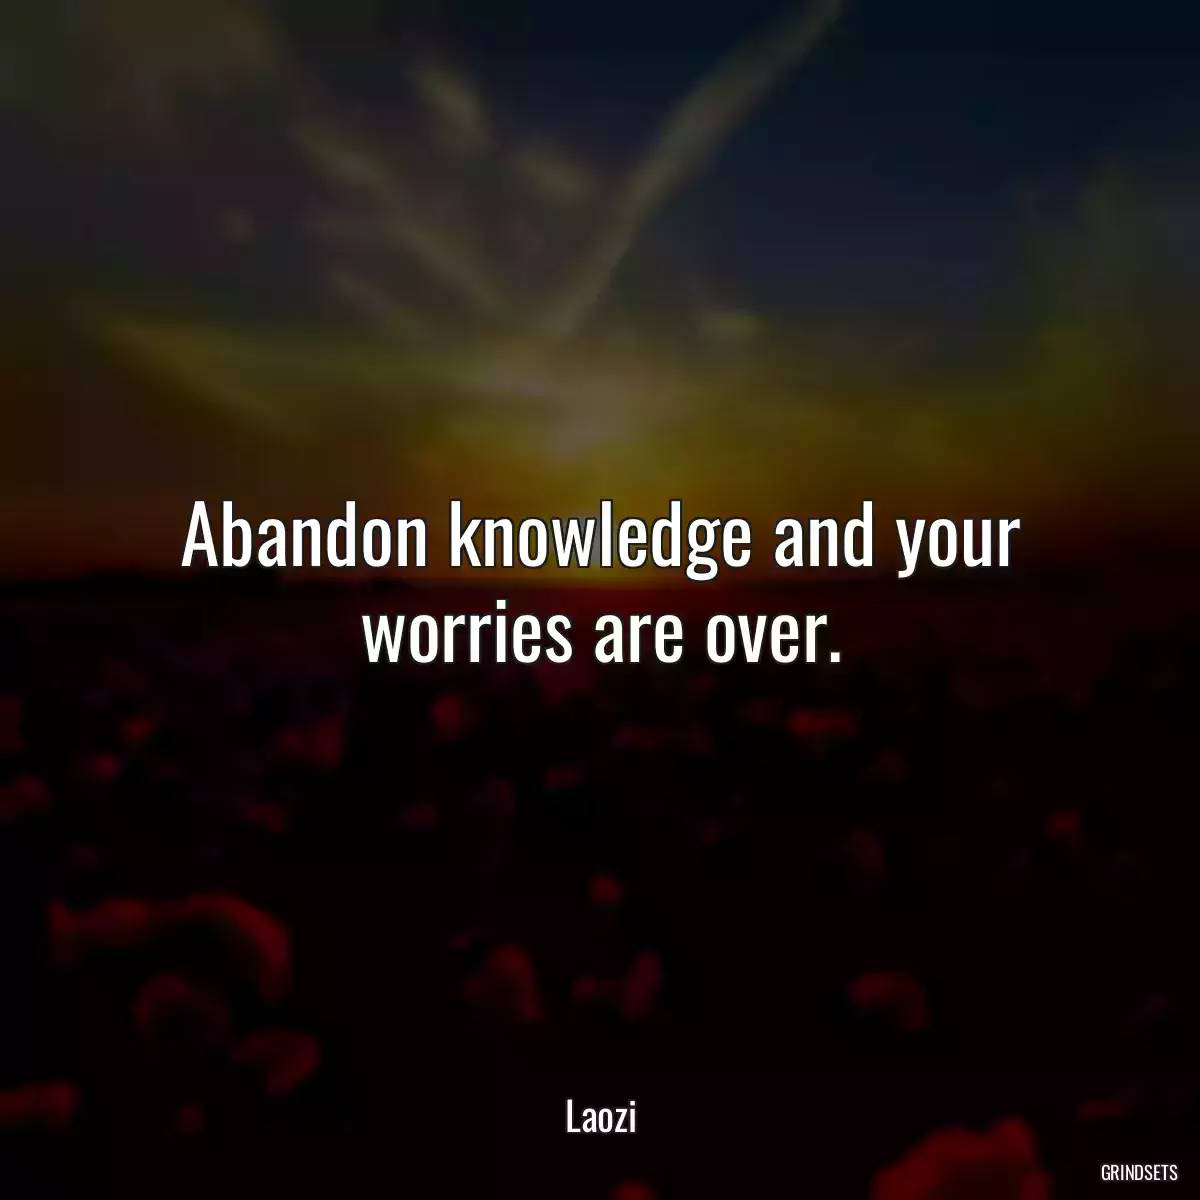 Abandon knowledge and your worries are over.